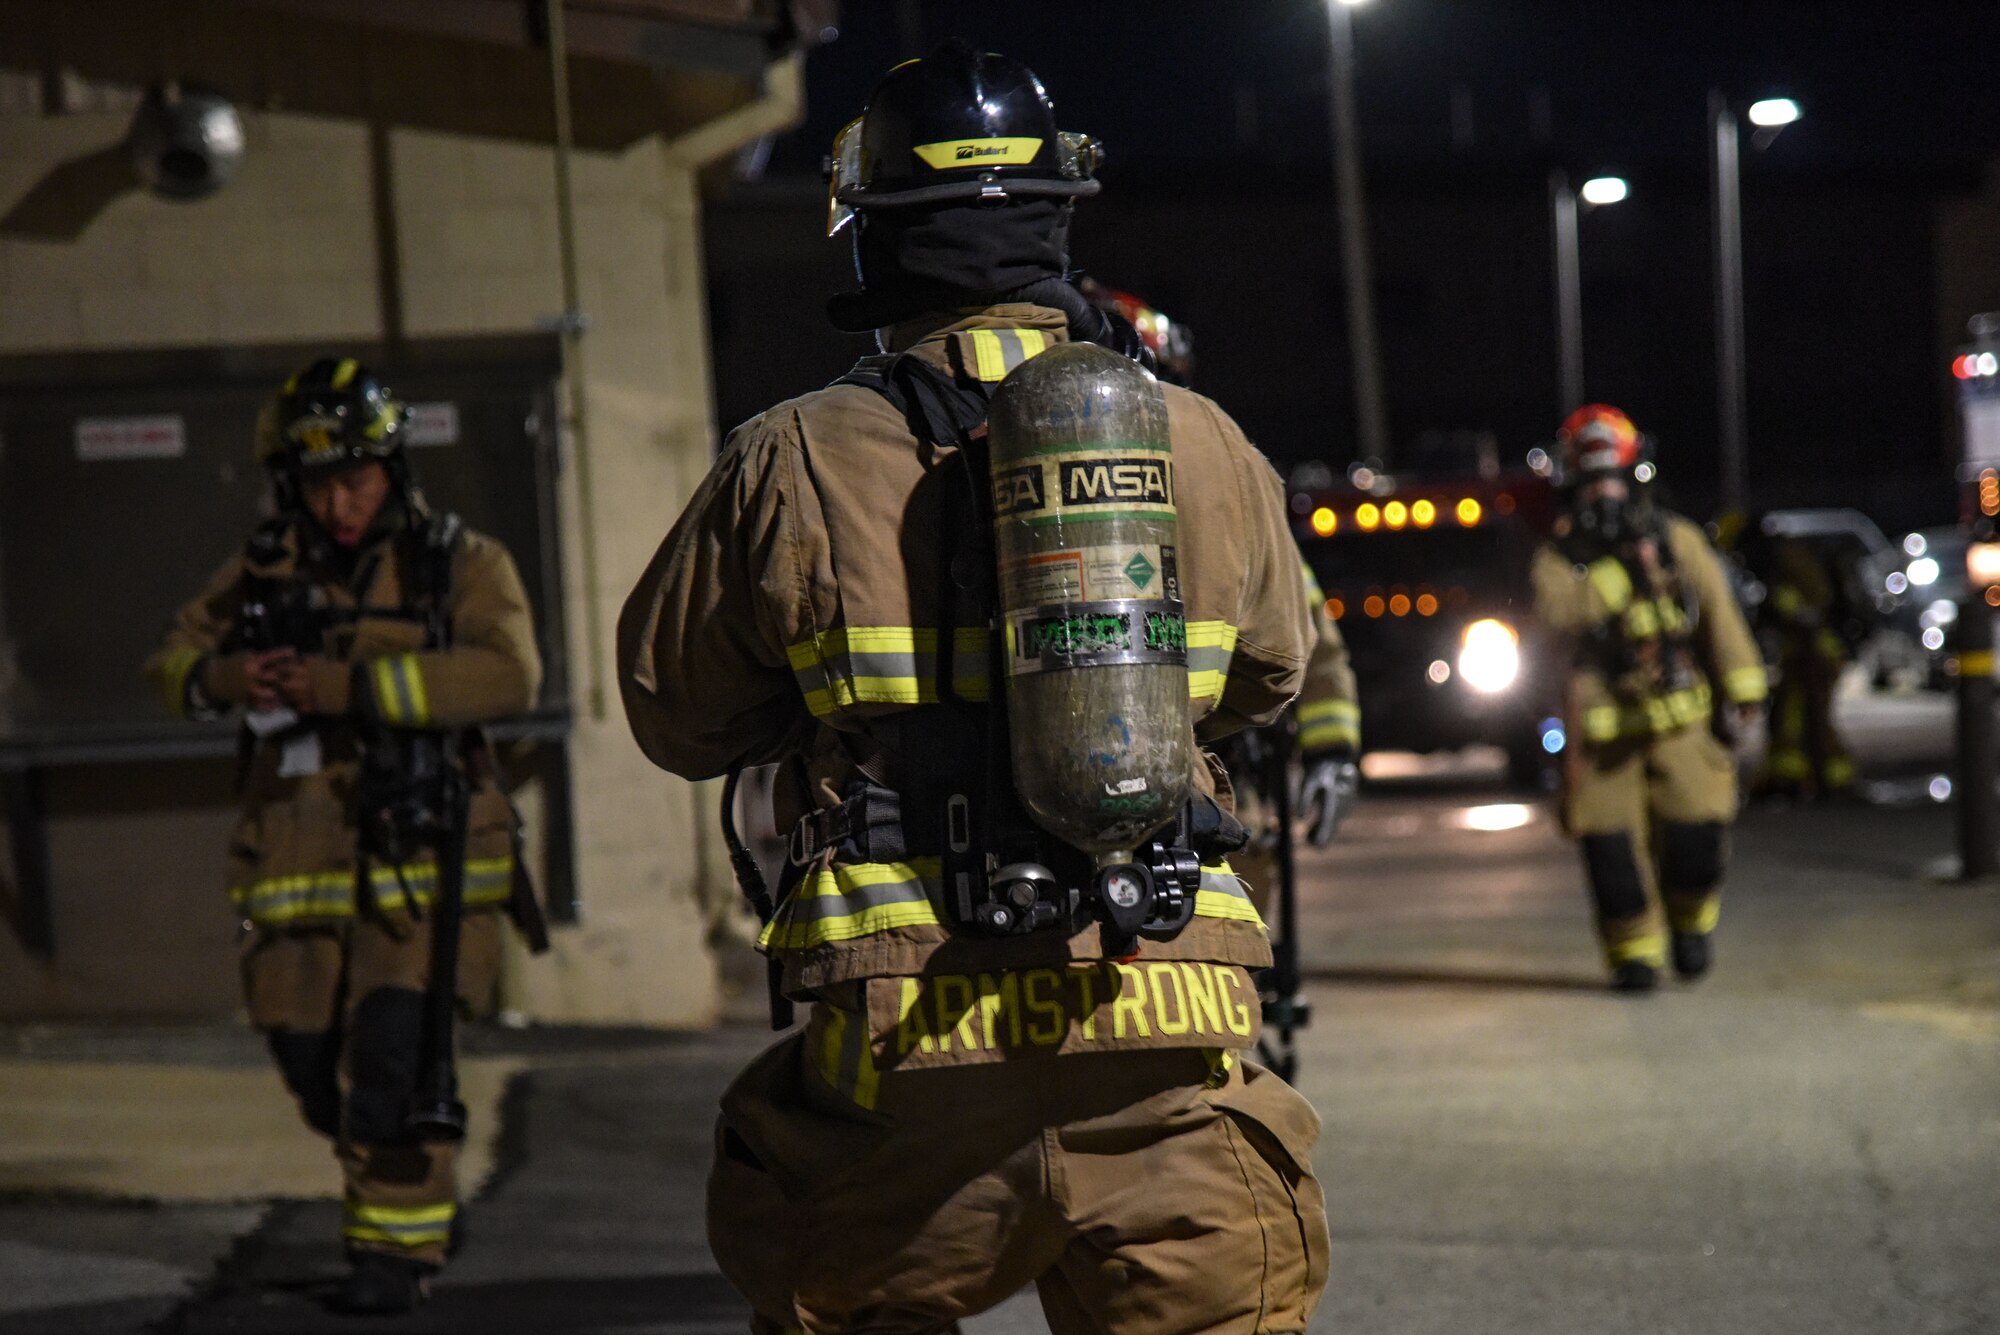 Firefighters from the 51st Civil Engineer Squadron gear up before a scenario during a training event